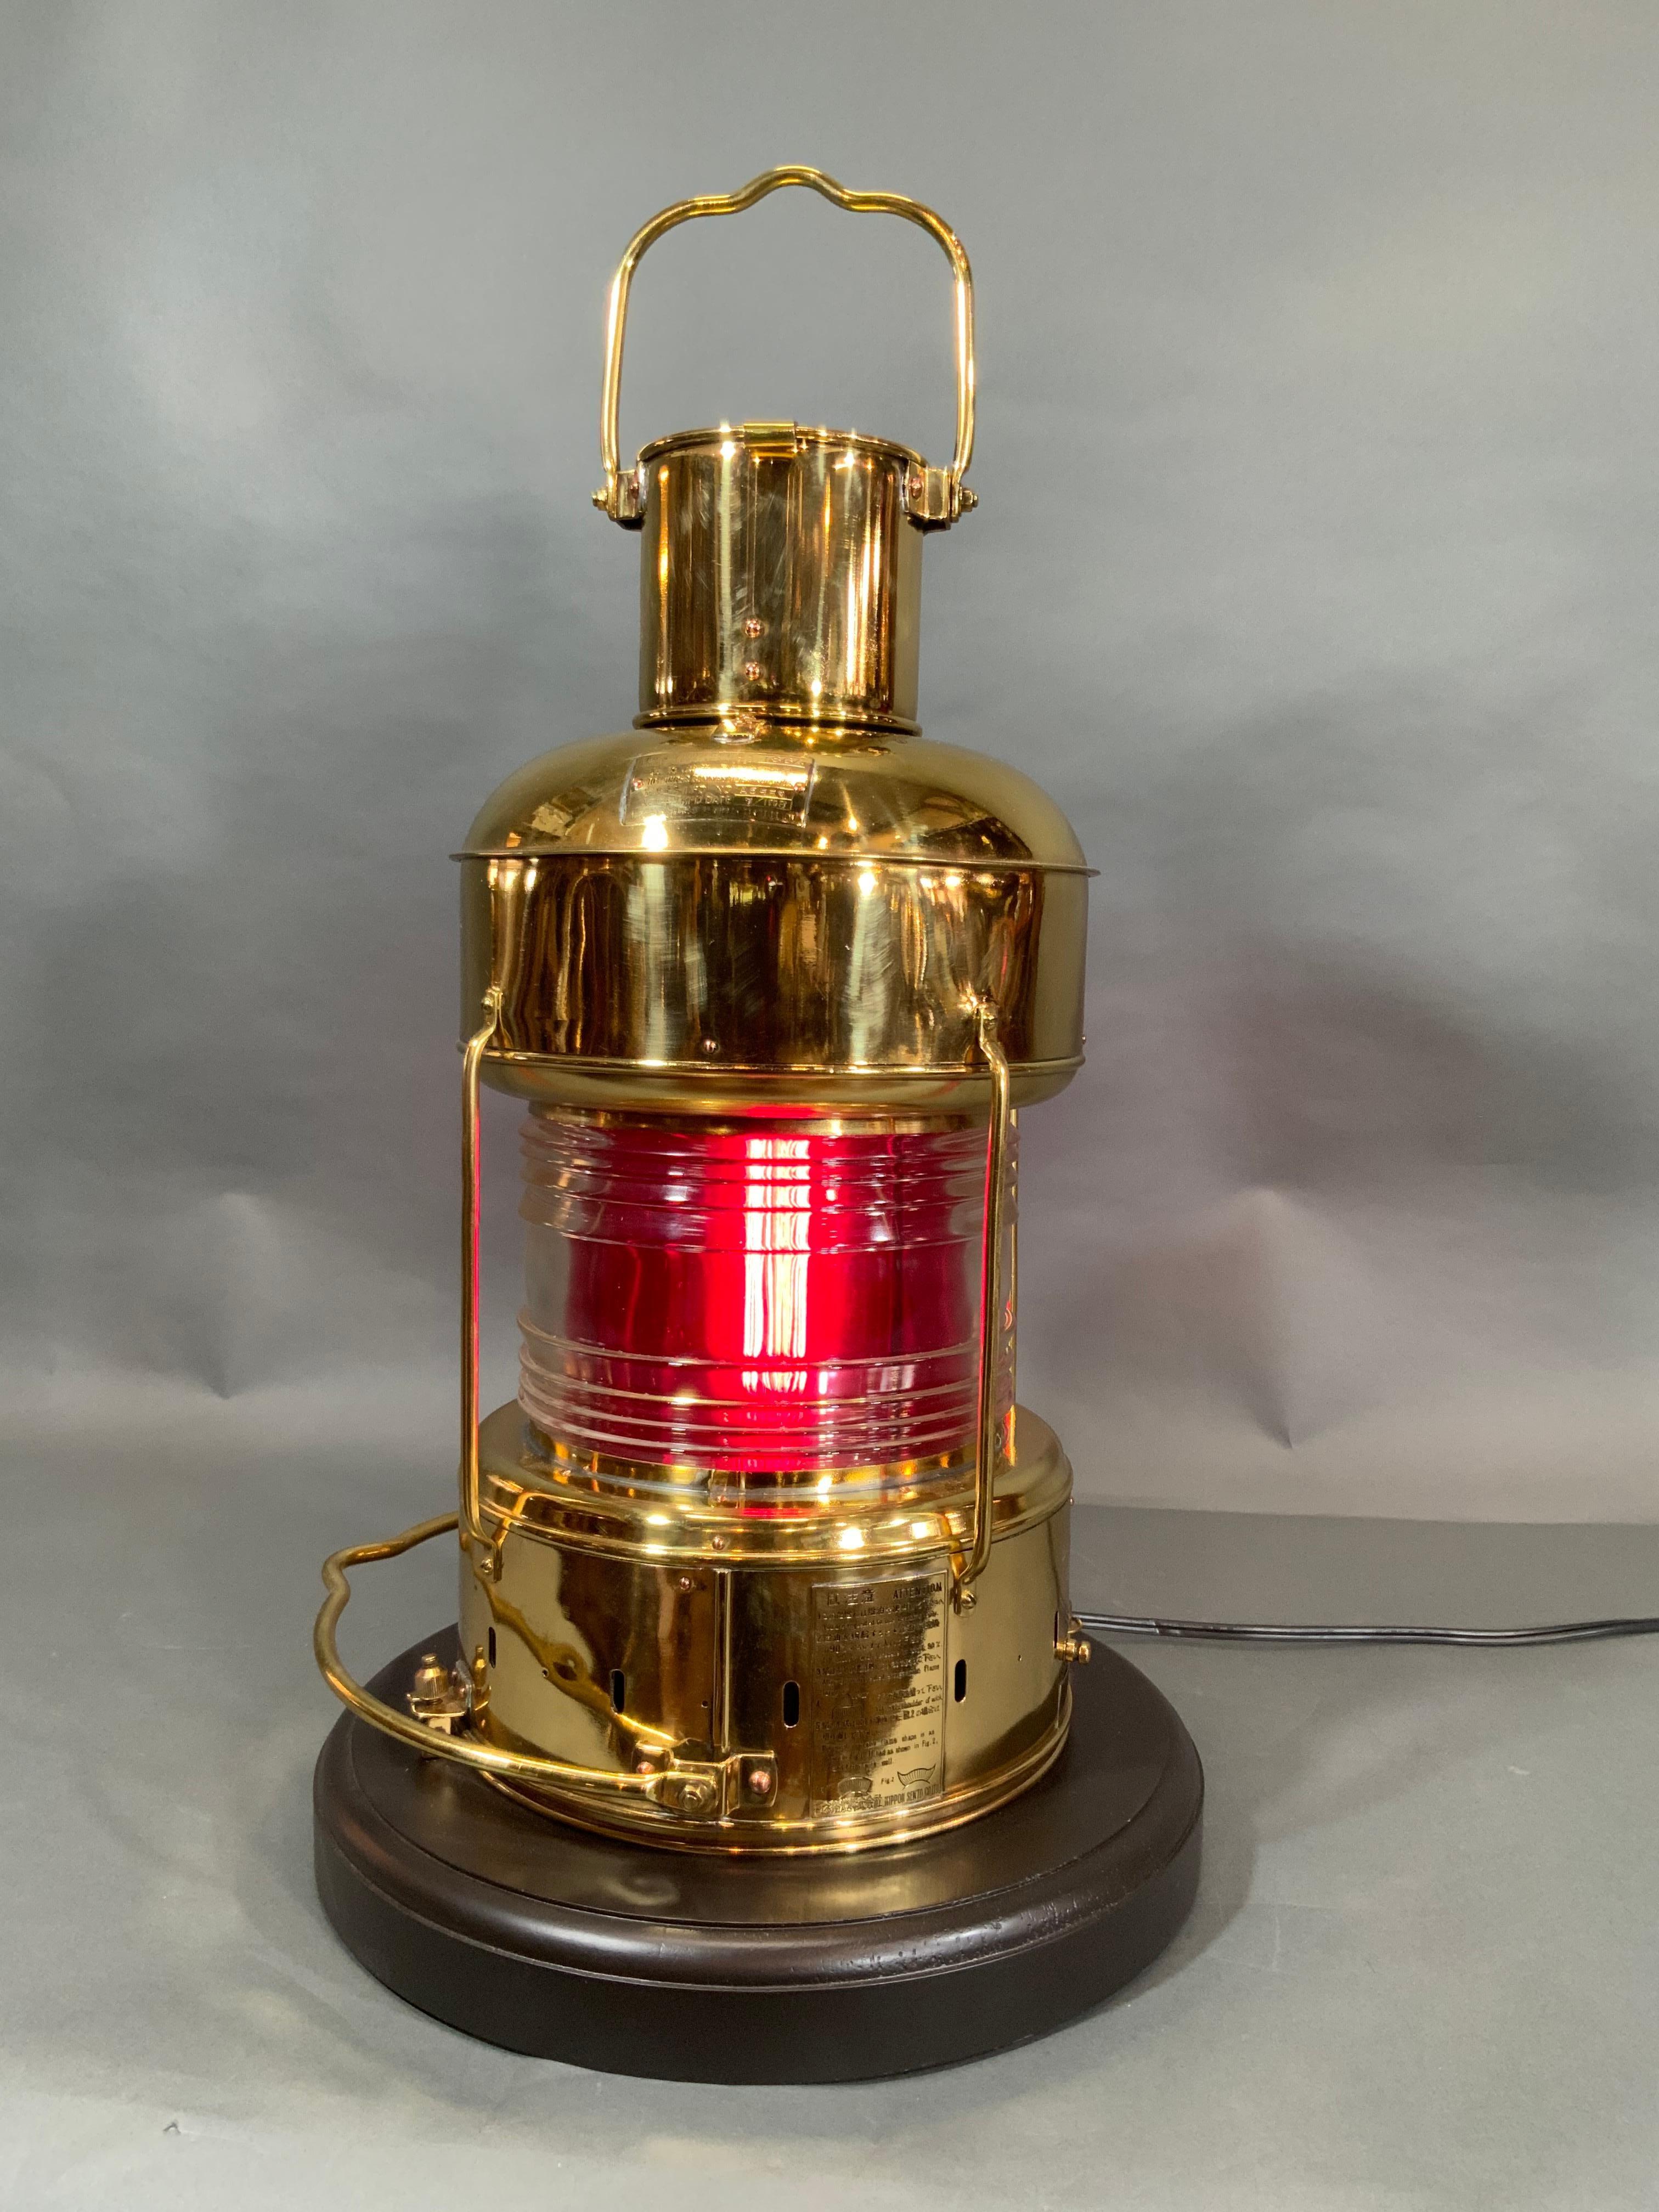 Genuine solid brass ship's lantern by Japanese maker Nippon Sento Co. LTD. Clear Fresnel glass lens with removable red filter. Mid twentieth century anchor lantern that has been meticulously polished and lacquered to an incredible level, then wired